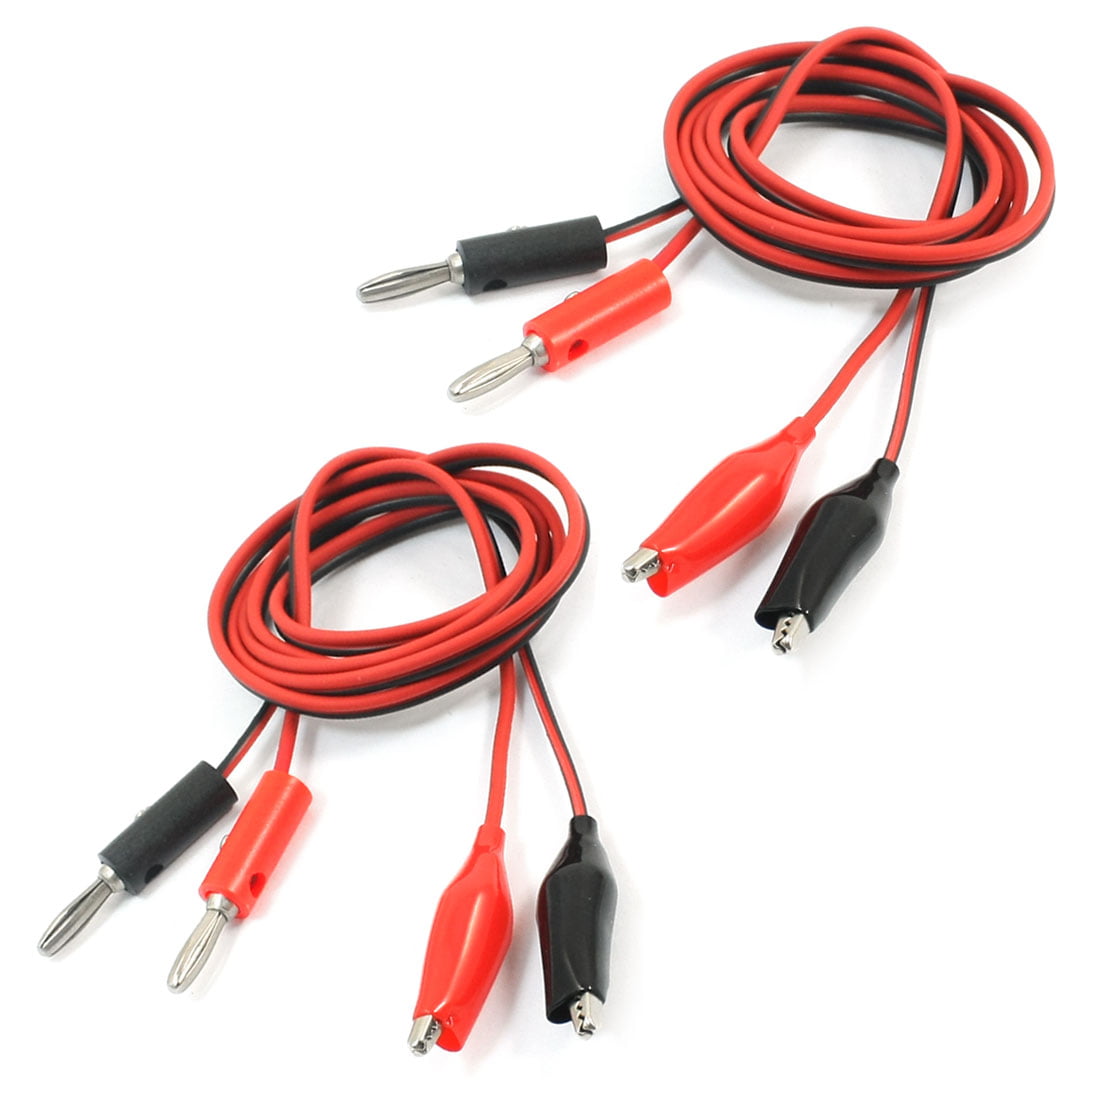 Multimeter Test Leads 4mm Male Banana To Alligator Clip Red Black 10A 98cm 